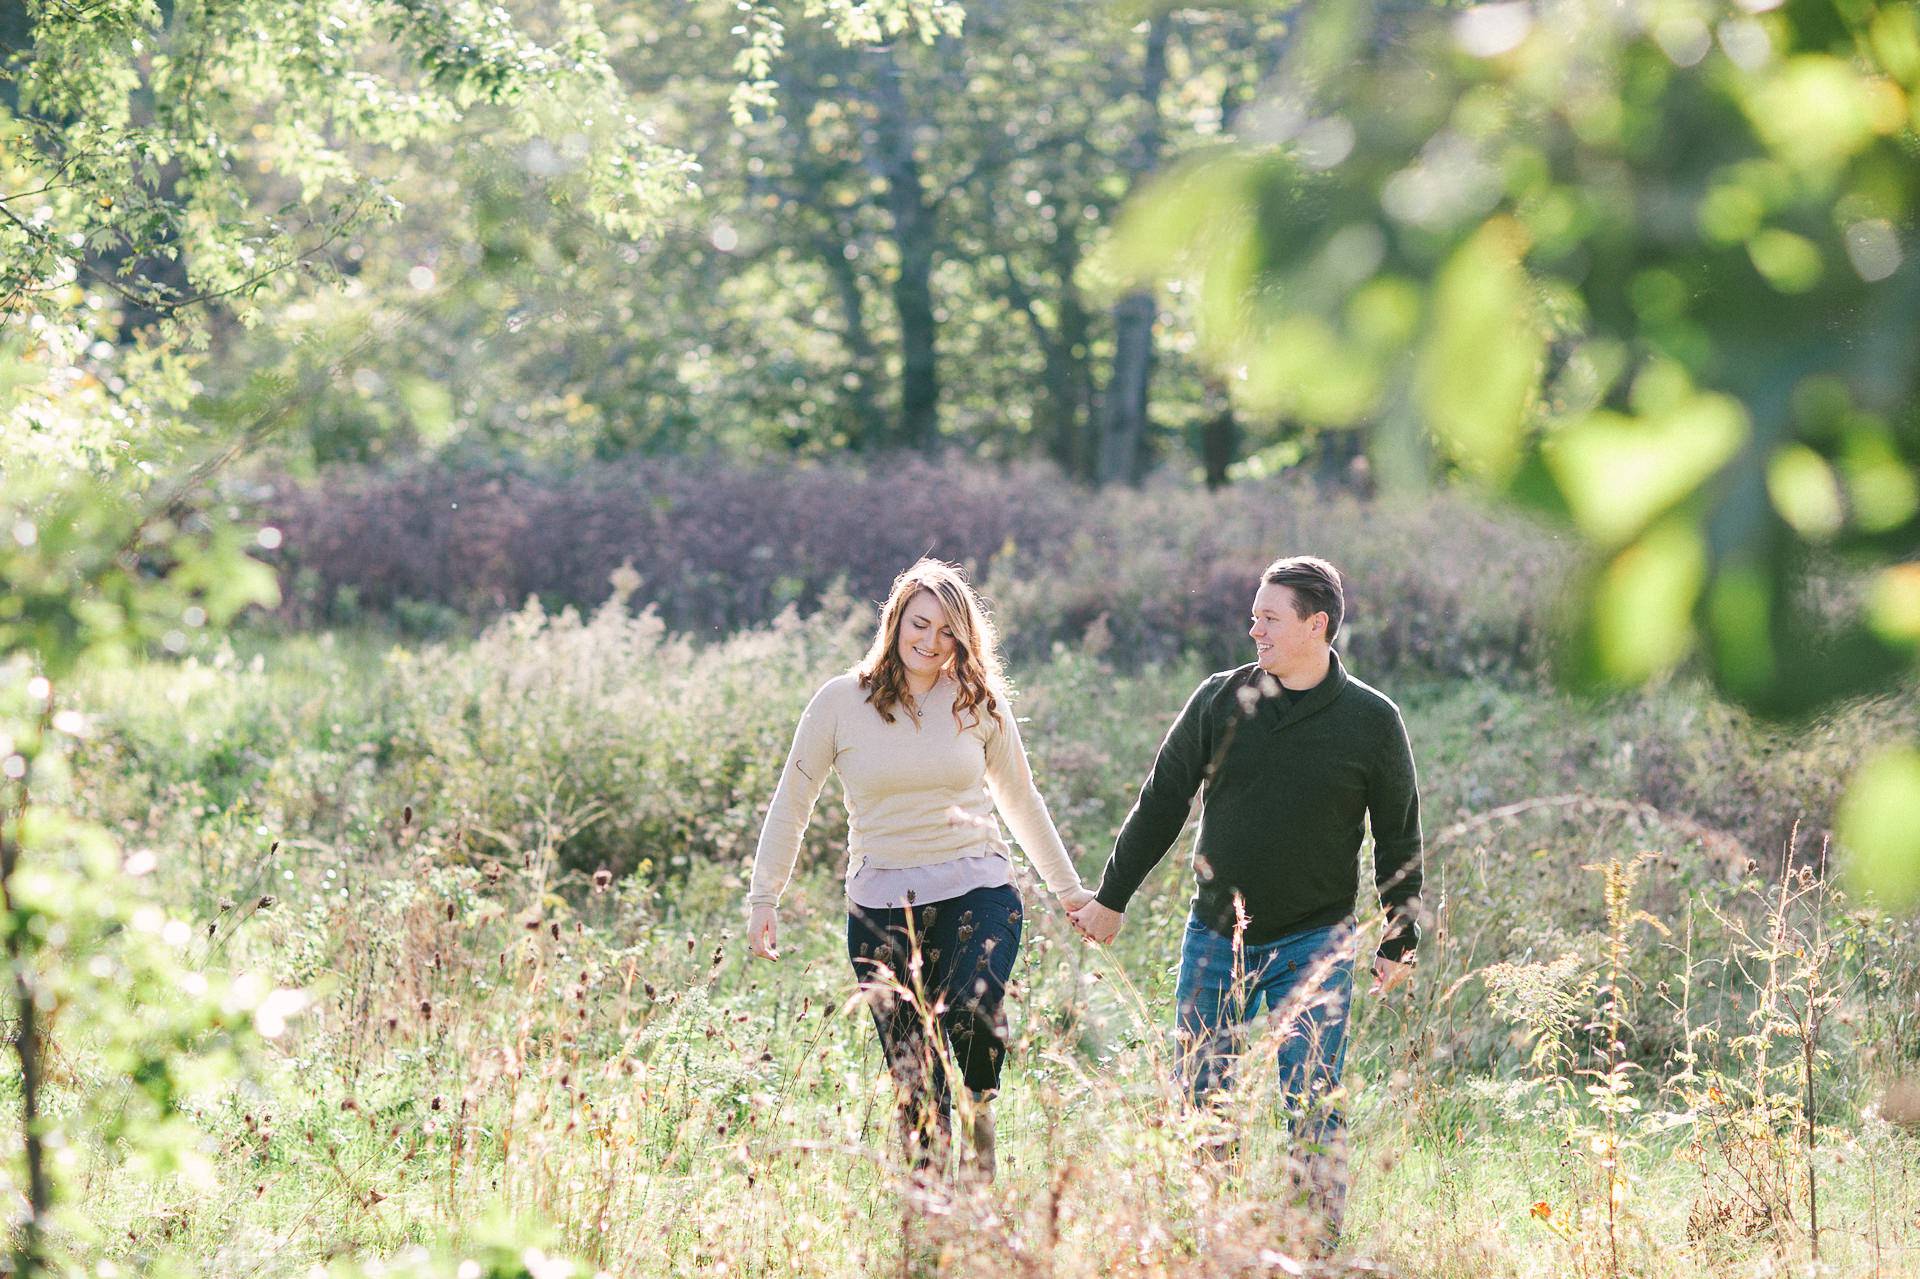 Cleveland Fall Engagement Session at Pattersons Fruit Farm 3.jpg